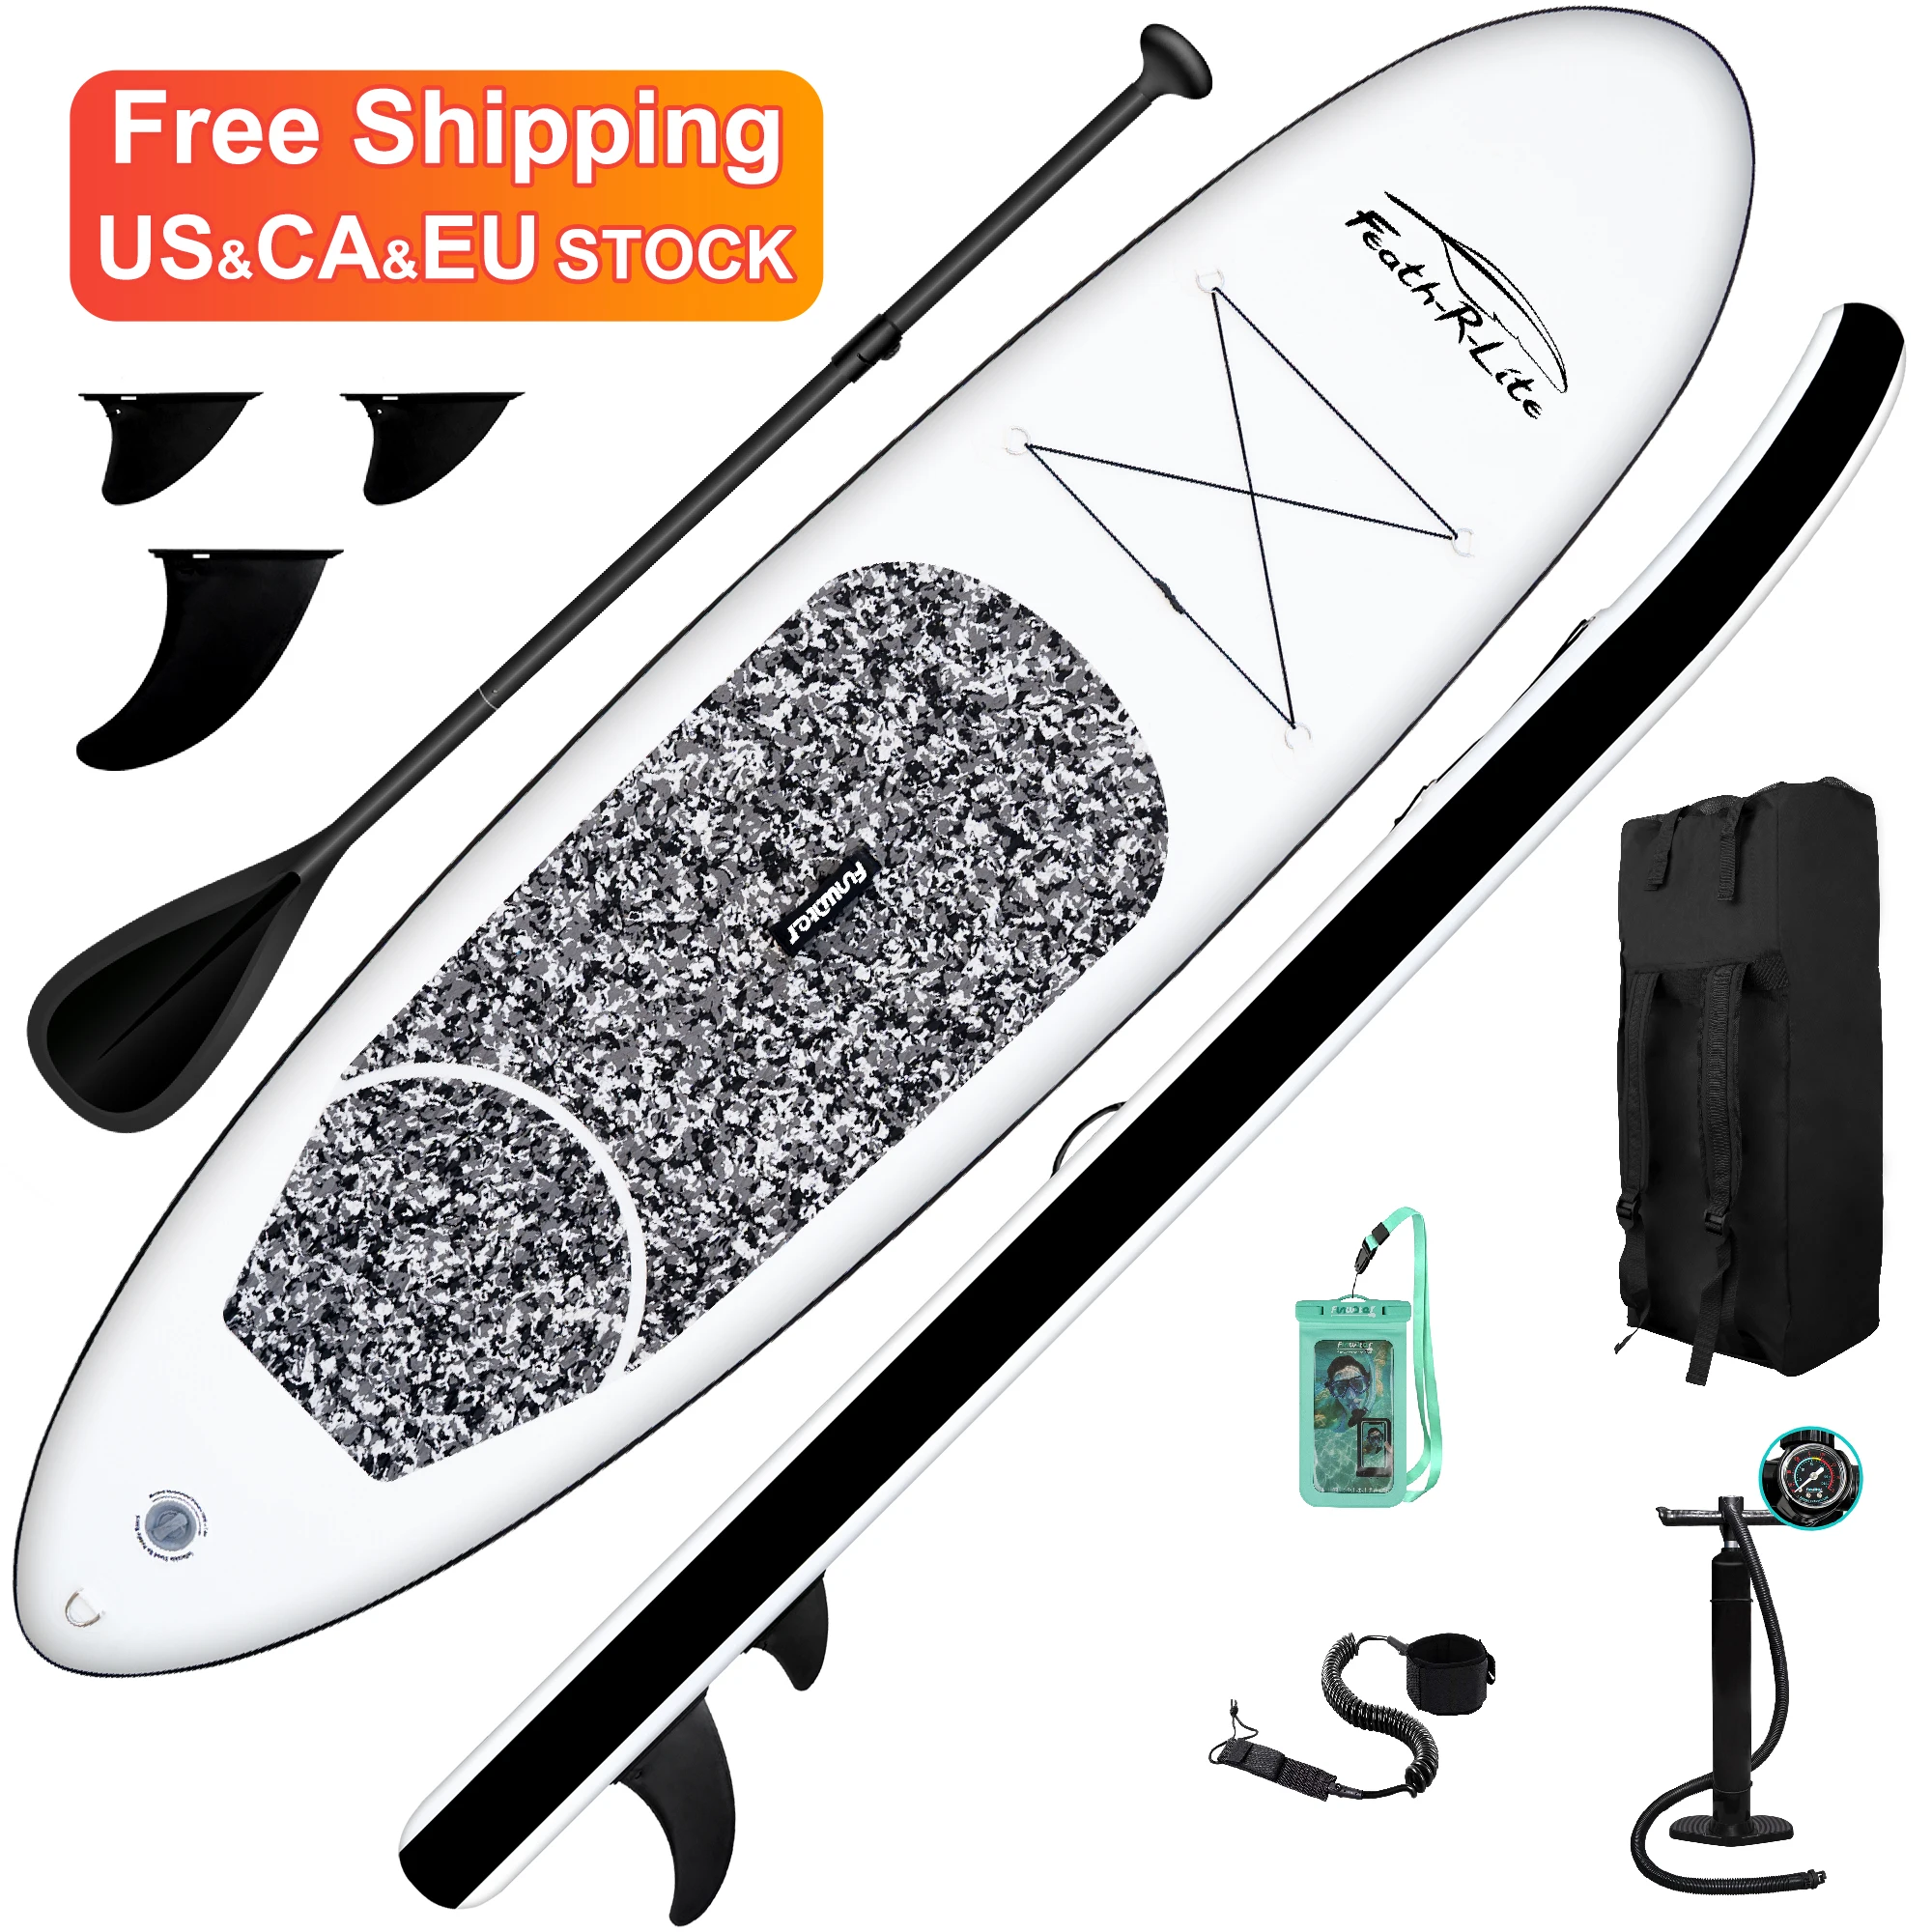 

FUNWATER Free Shipping Dropshipping OEM 10 'x 32" x 6" supboard surfboard paddle surf inflatable paddle board sup peddel iboard